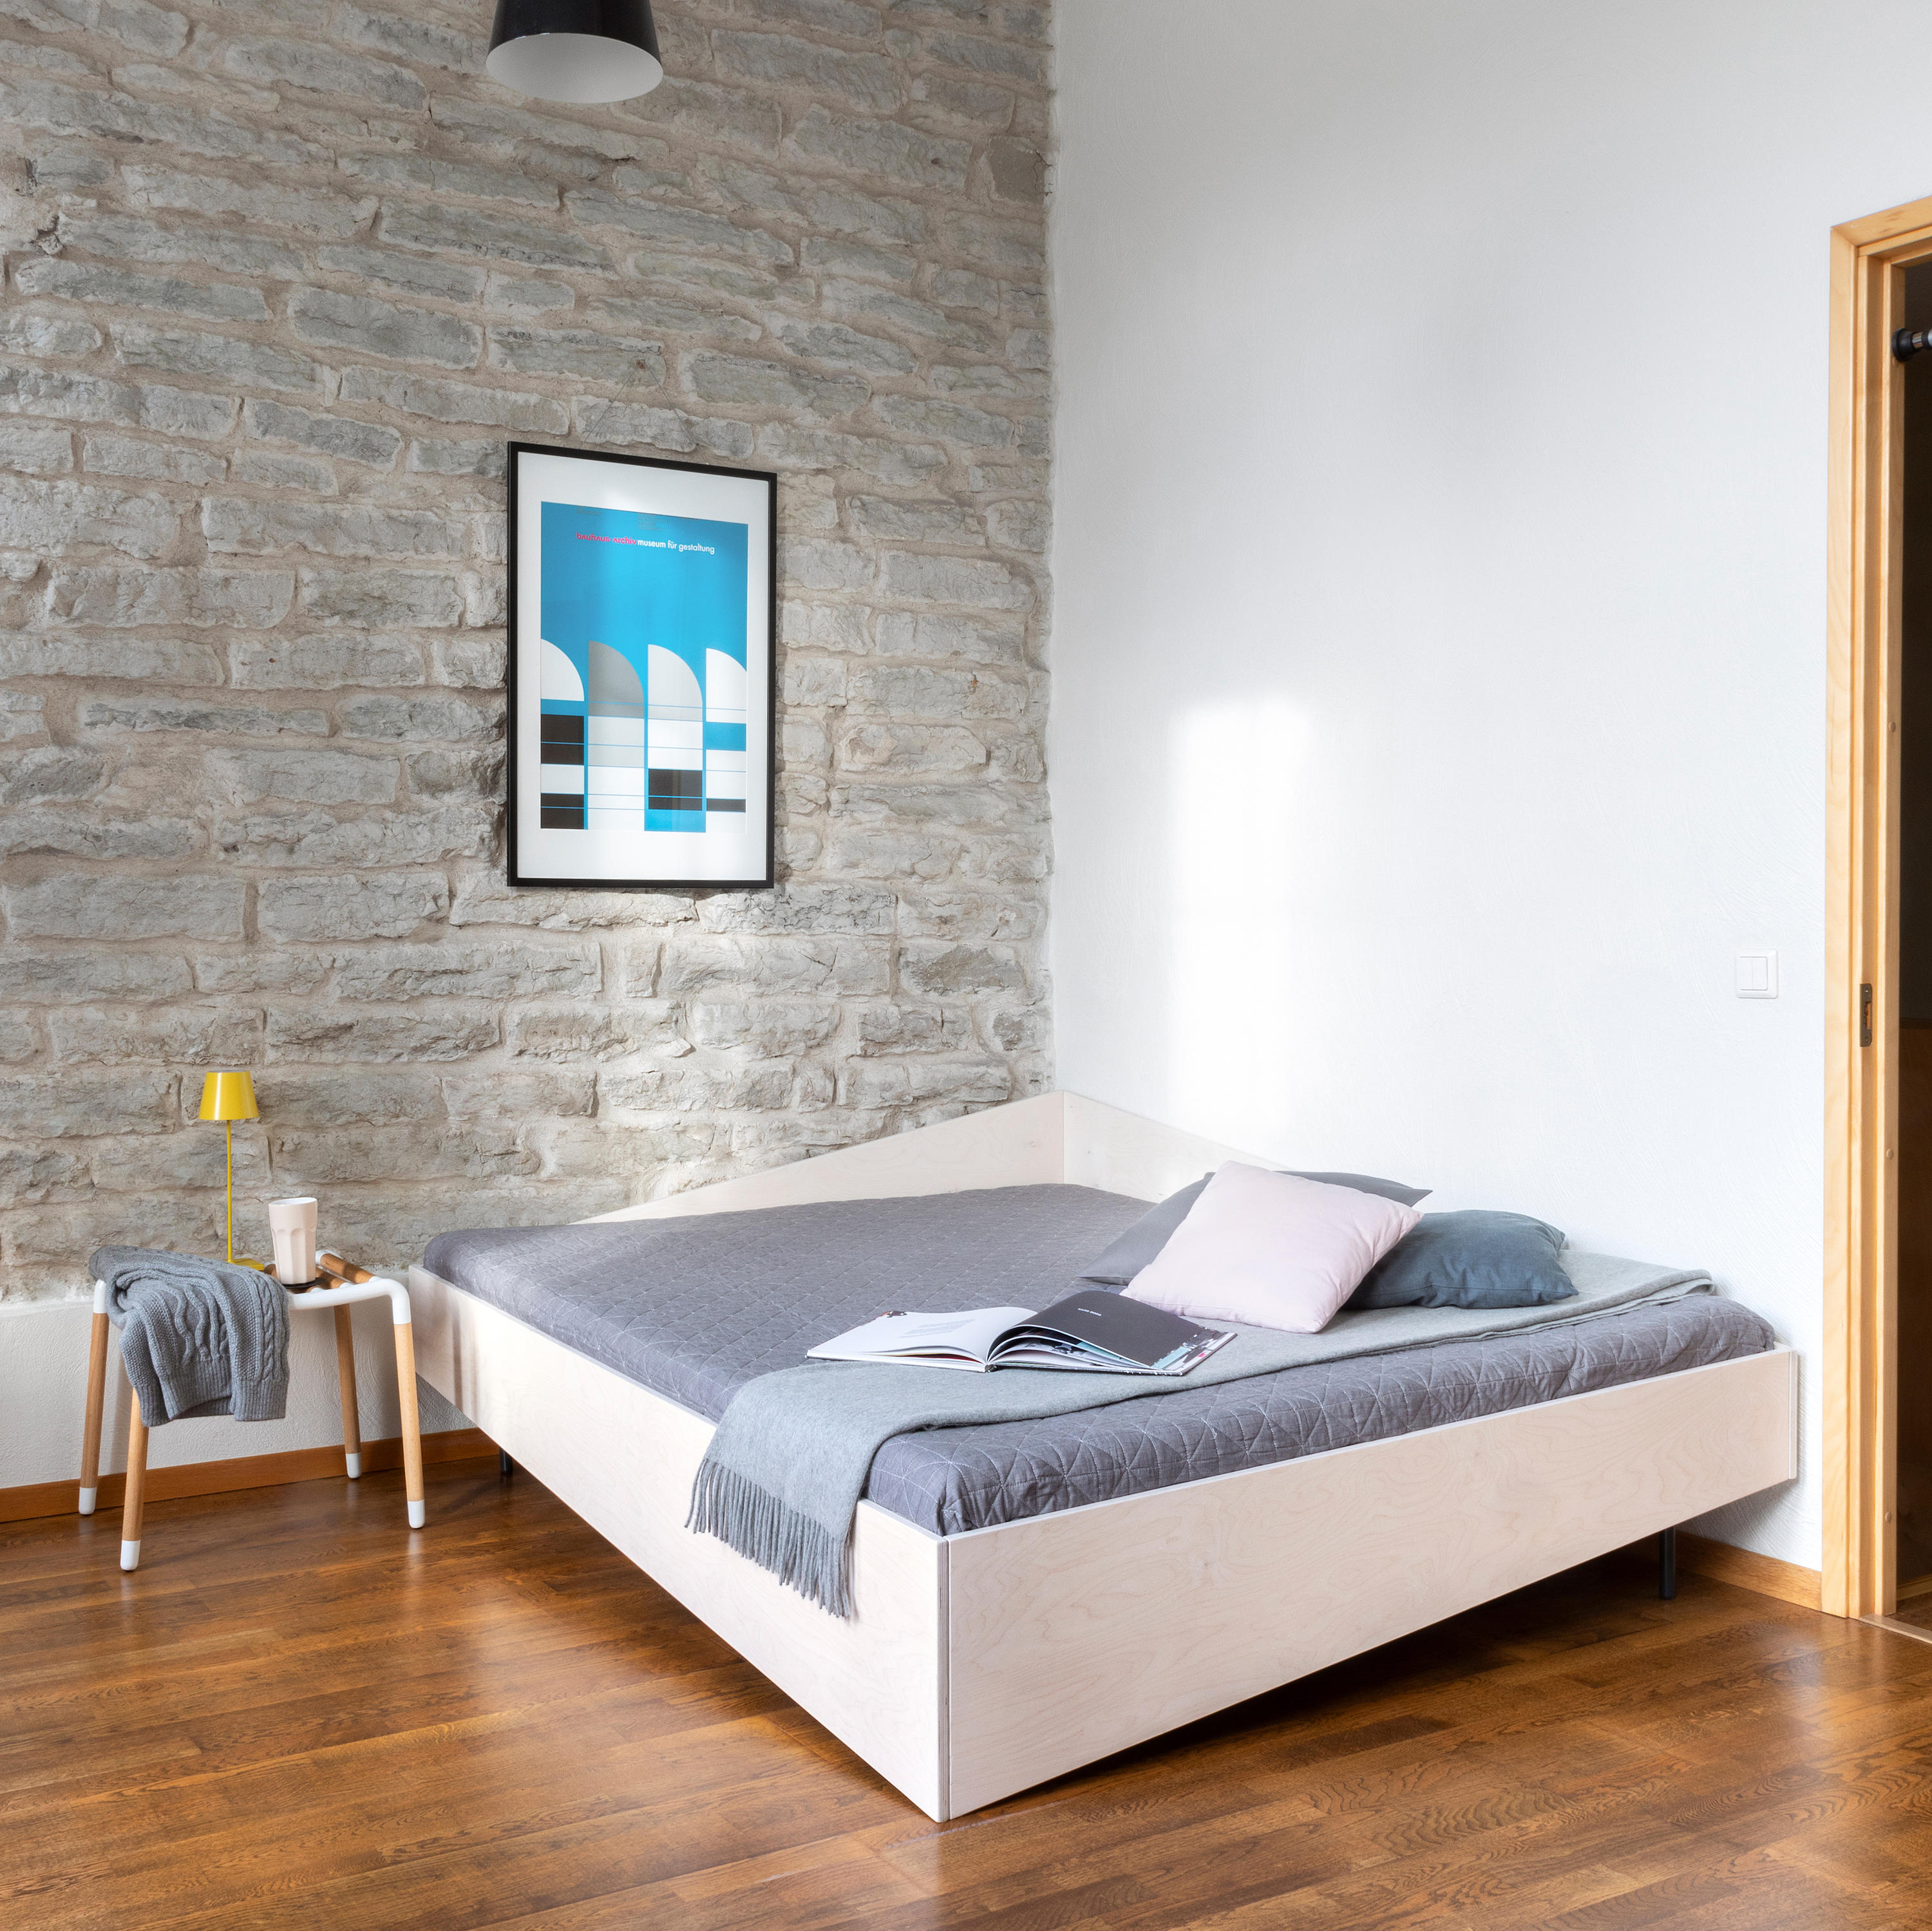 Cornerbed - Beds From Radis Furniture | Architonic